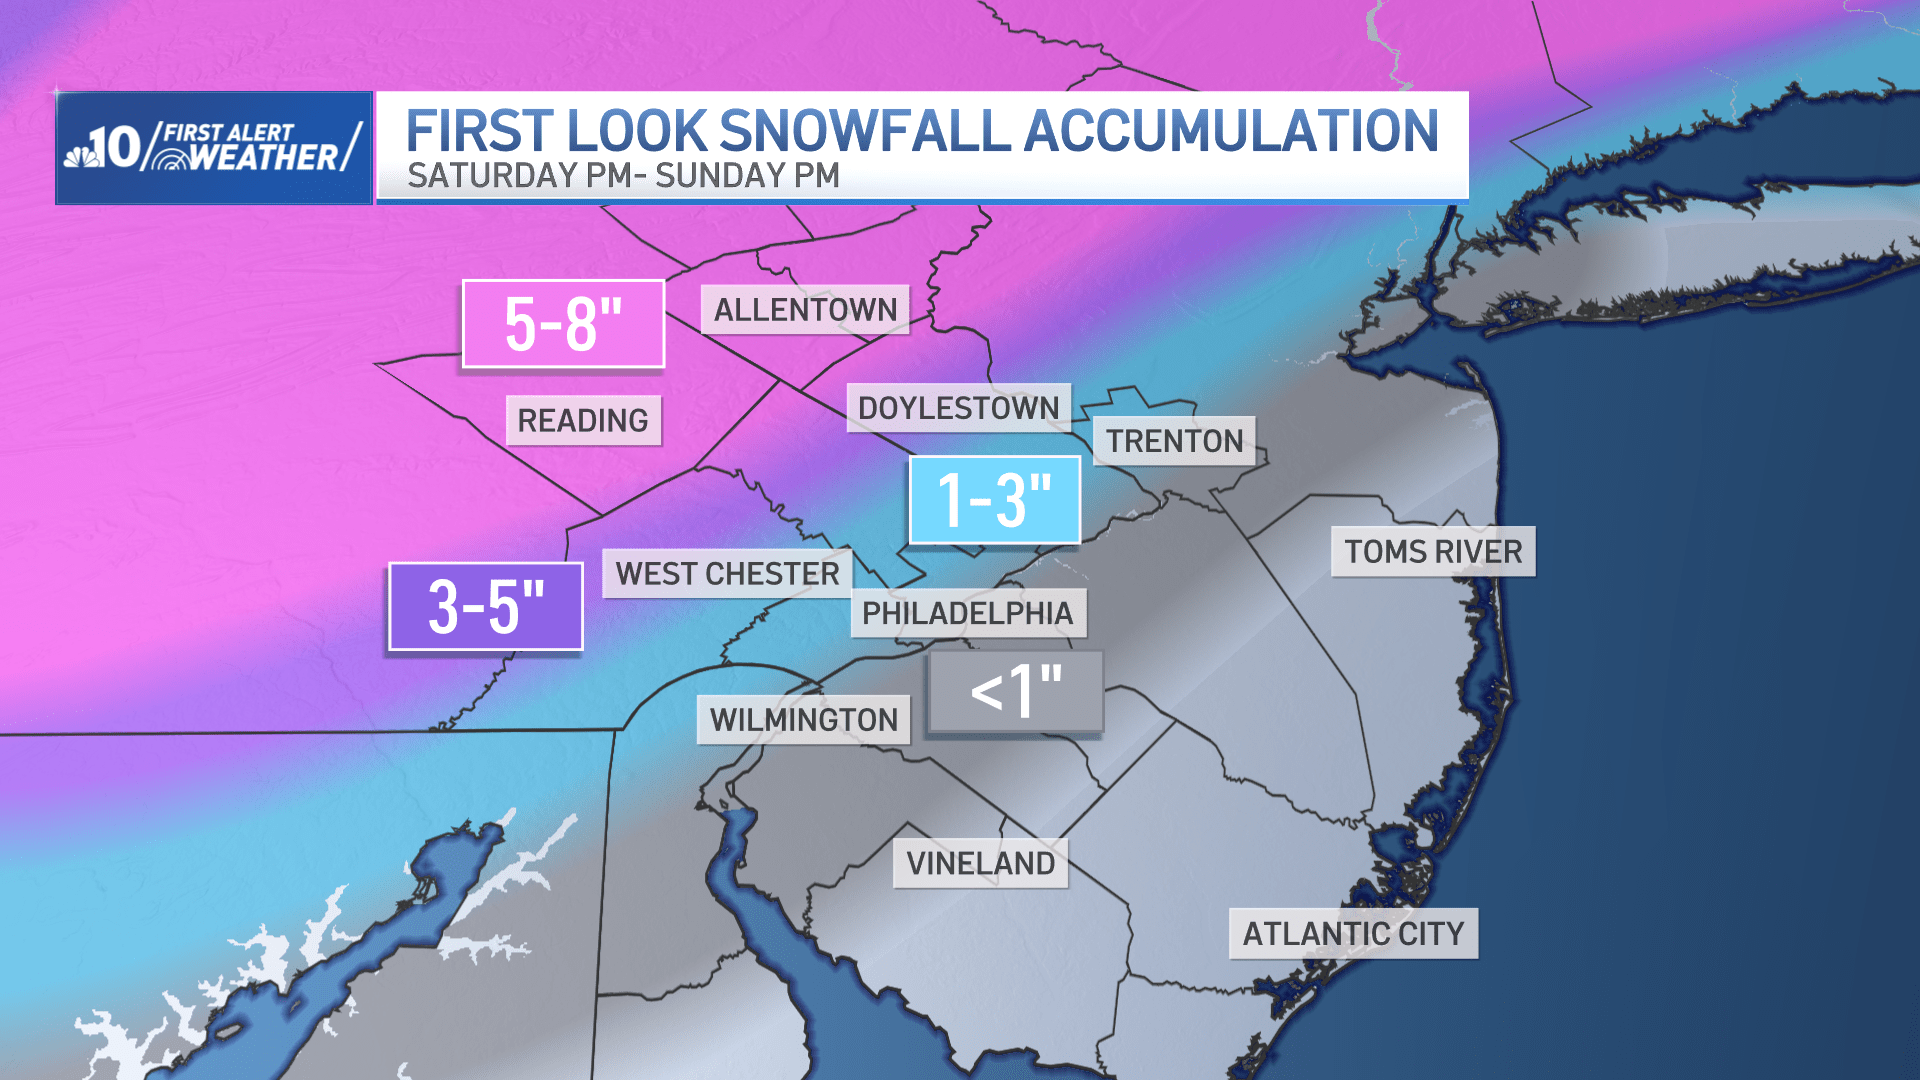 winter storm could bring snow, but not for everyone. get a look at estimated totals